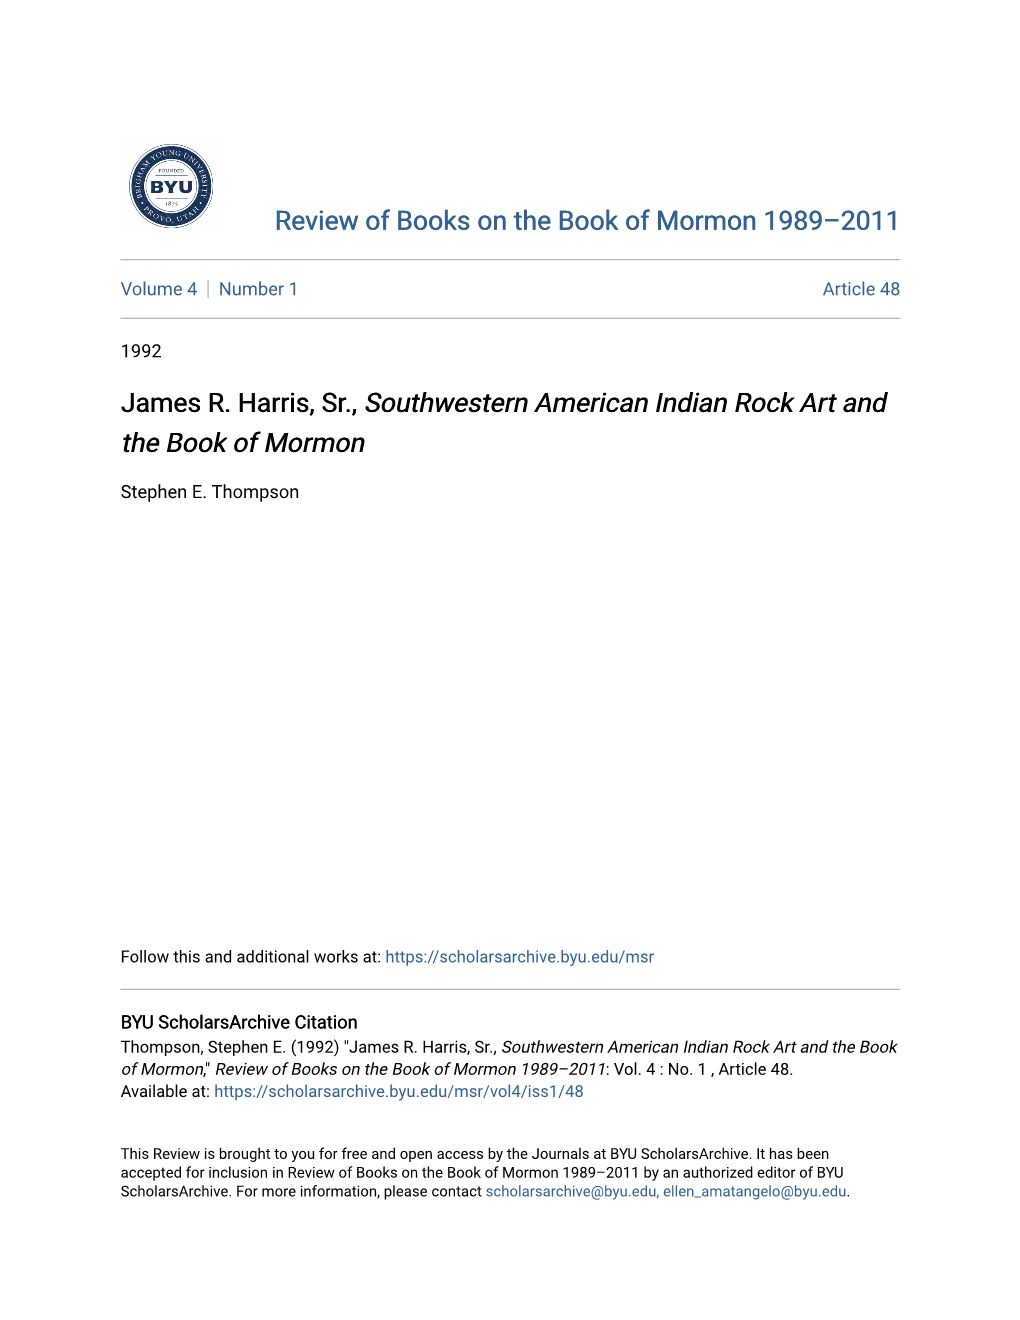 James R. Harris, Sr., Southwestern American Indian Rock Art and the Book of Mormon